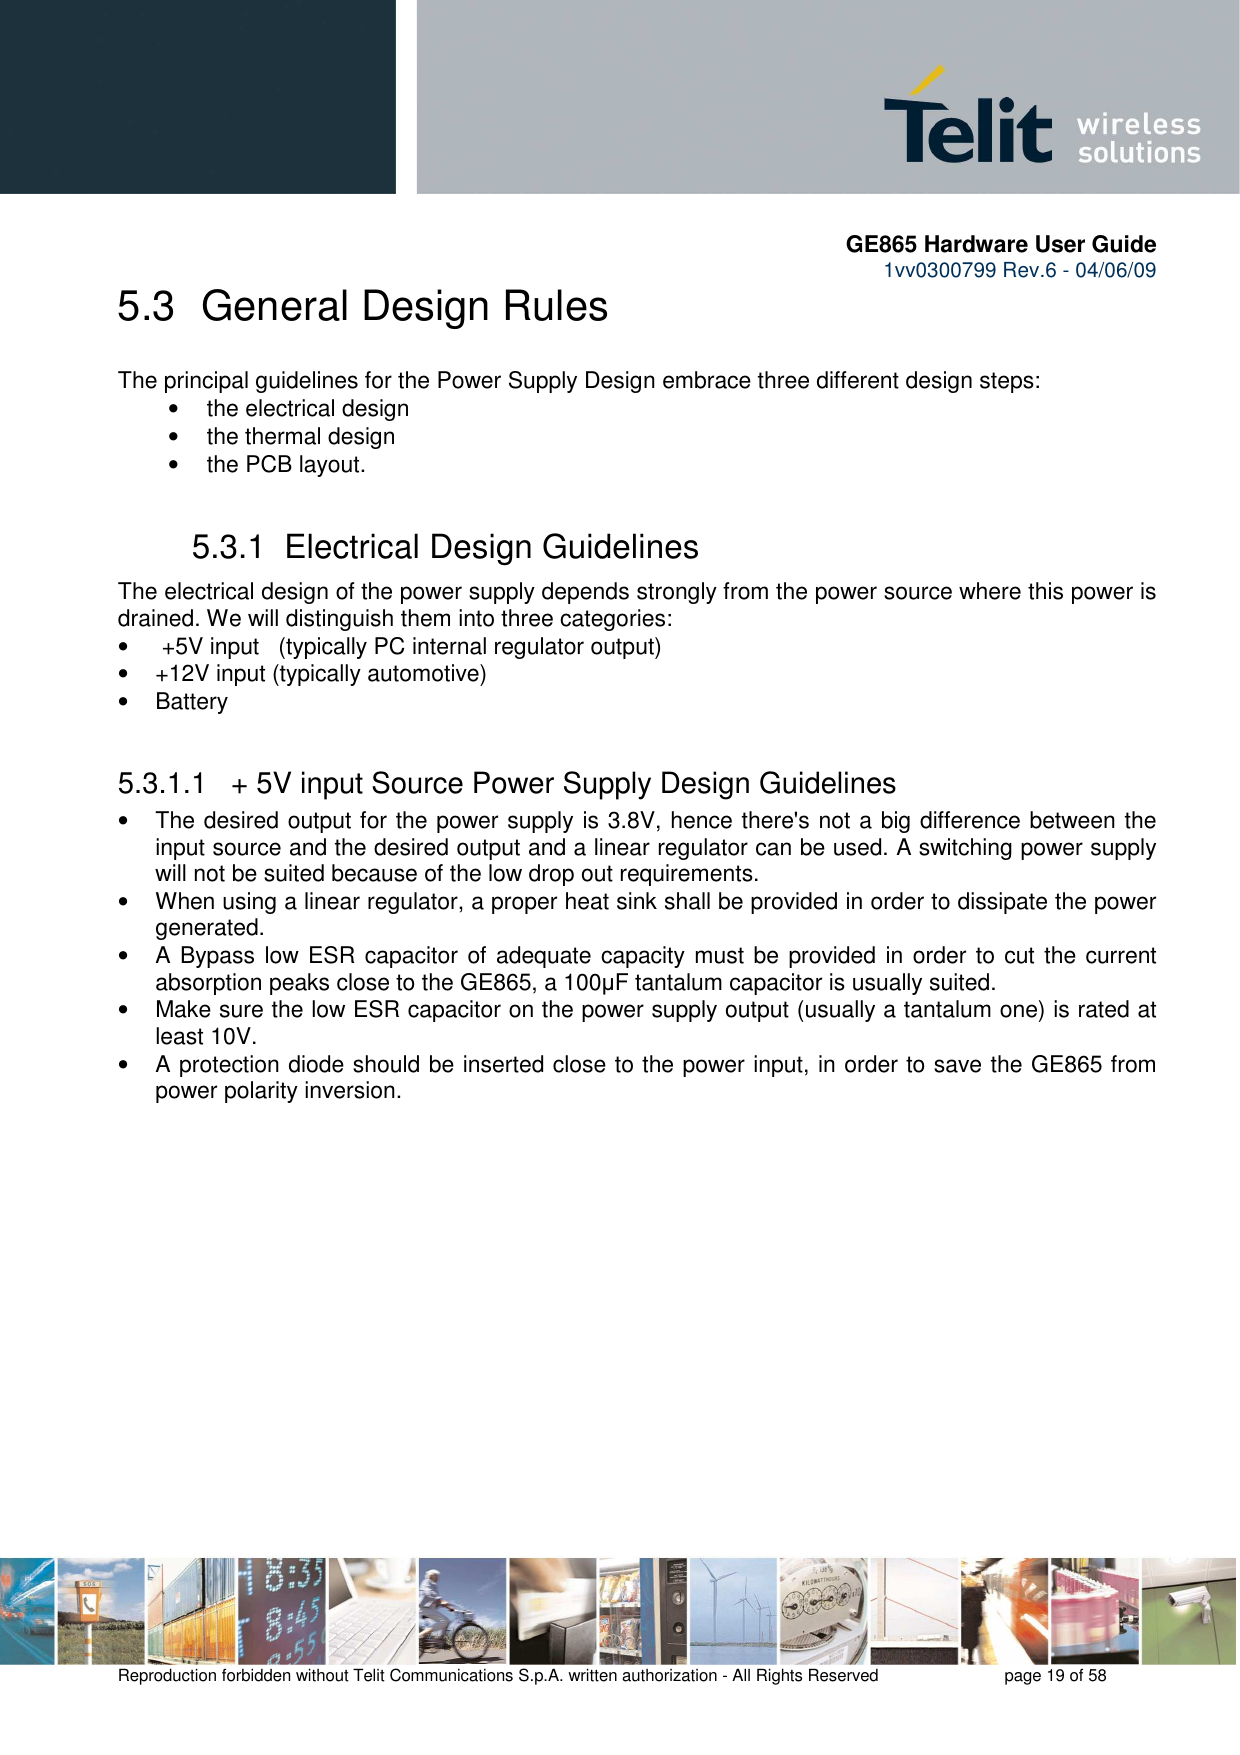       GE865 Hardware User Guide 1vv0300799 Rev.6 - 04/06/09      Reproduction forbidden without Telit Communications S.p.A. written authorization - All Rights Reserved    page 19 of 58  5.3  General Design Rules The principal guidelines for the Power Supply Design embrace three different design steps: •  the electrical design •  the thermal design •  the PCB layout. 5.3.1  Electrical Design Guidelines The electrical design of the power supply depends strongly from the power source where this power is drained. We will distinguish them into three categories: •   +5V input   (typically PC internal regulator output) •  +12V input (typically automotive) •  Battery  5.3.1.1   + 5V input Source Power Supply Design Guidelines •  The desired output for the power supply is 3.8V, hence there&apos;s not a big difference between the input source and the desired output and a linear regulator can be used. A switching power supply will not be suited because of the low drop out requirements. •  When using a linear regulator, a proper heat sink shall be provided in order to dissipate the power generated. •  A  Bypass low ESR capacitor  of adequate capacity must be provided in order to cut the current absorption peaks close to the GE865, a 100µF tantalum capacitor is usually suited. •  Make sure the low ESR capacitor on the power supply output (usually a tantalum one) is rated at least 10V. •  A protection diode should be inserted close to the power input, in order to save the GE865 from power polarity inversion. 